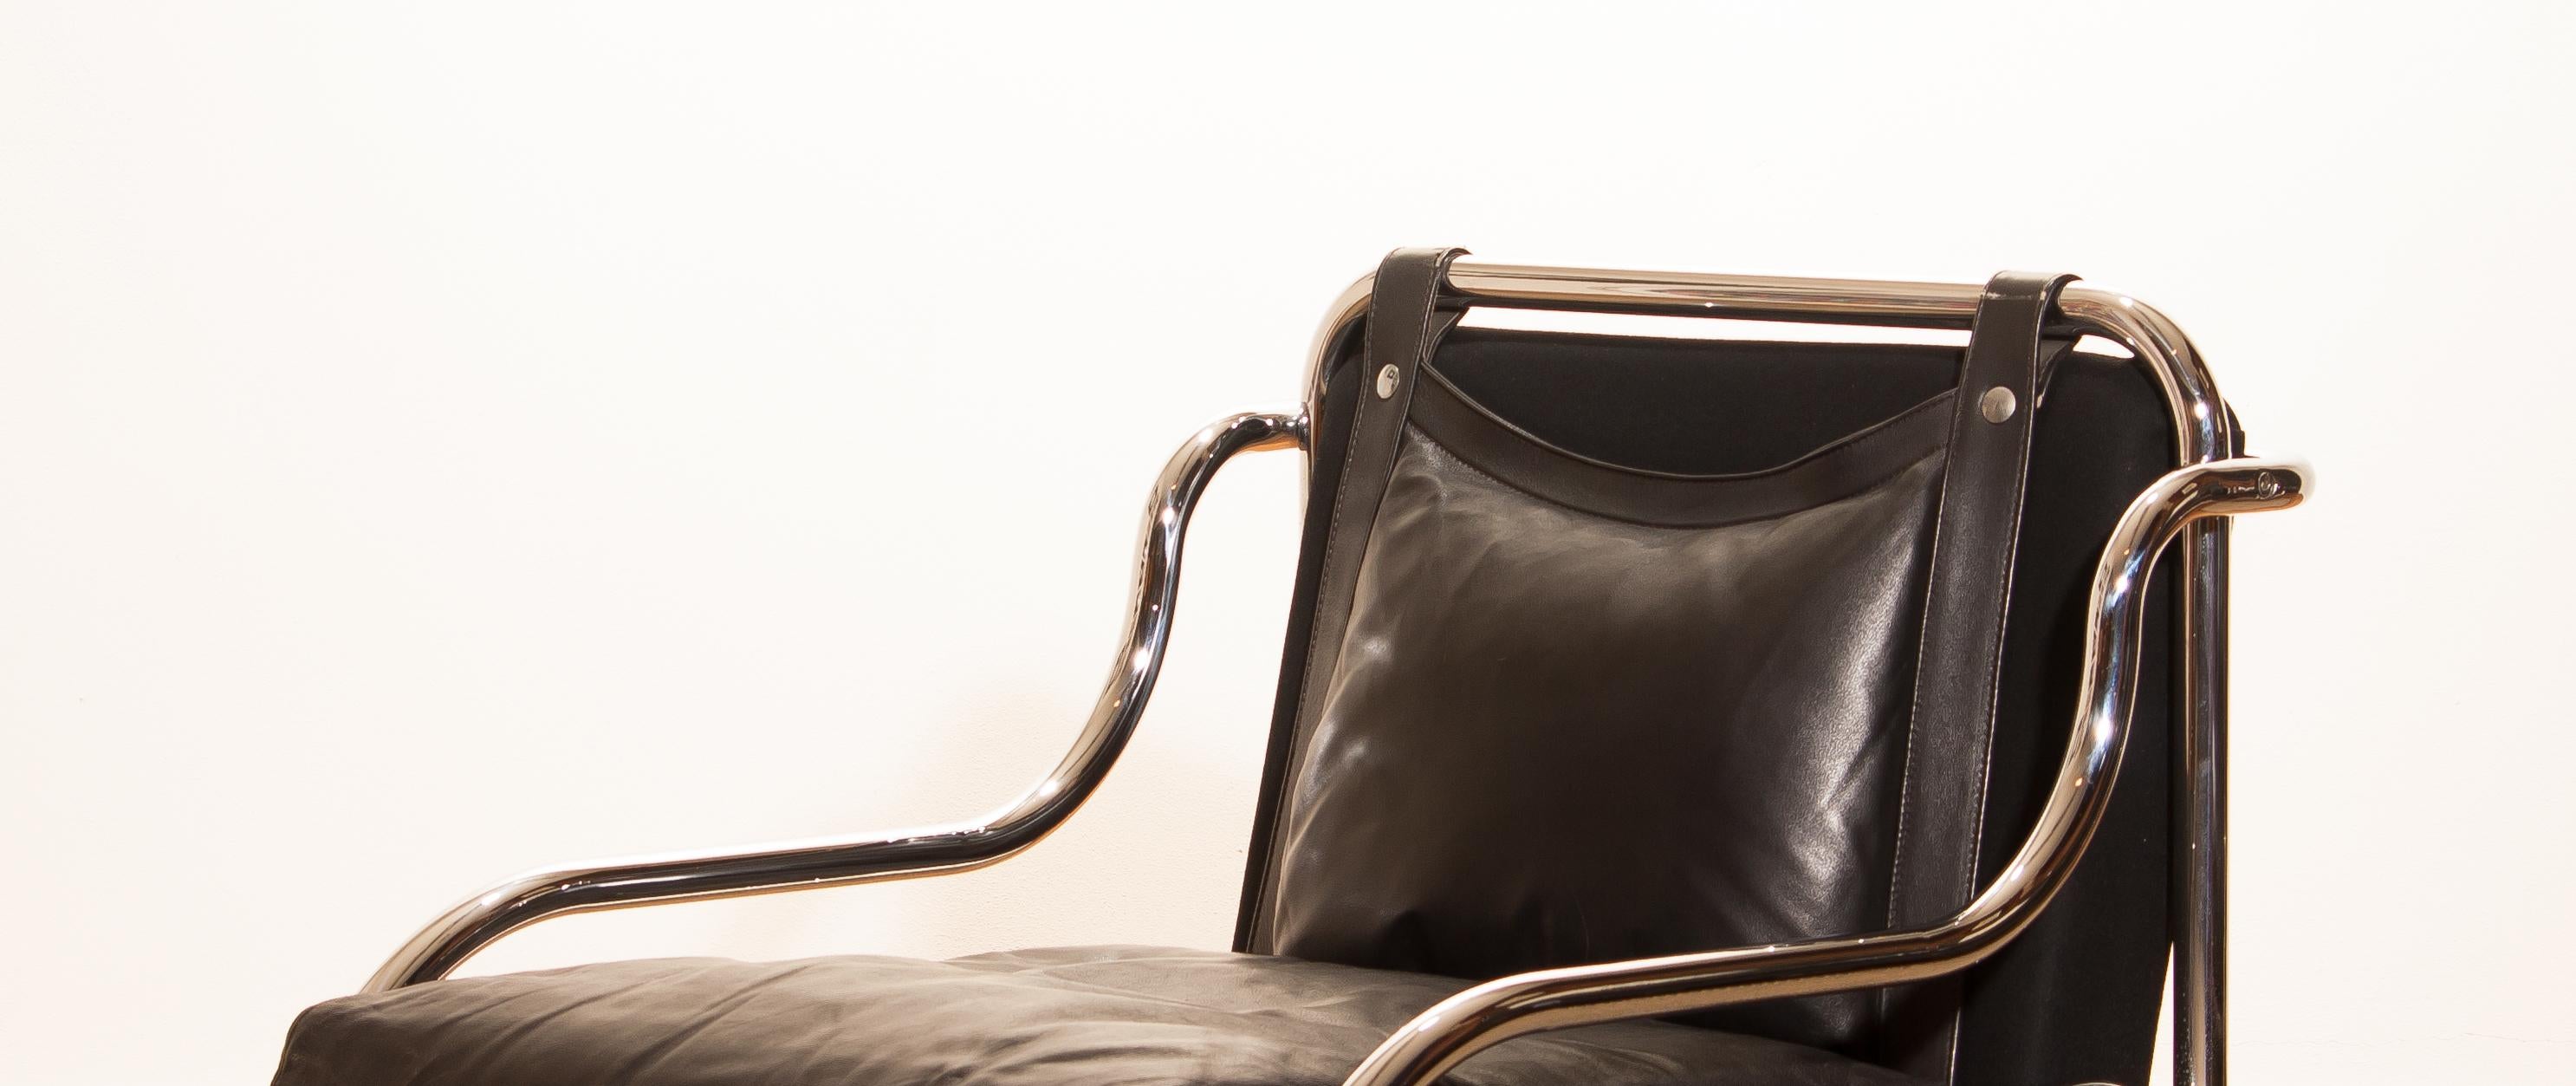 Mid-20th Century 1960s Leather and Chrome Lounge Chair by Gae Aulenti for Poltronova